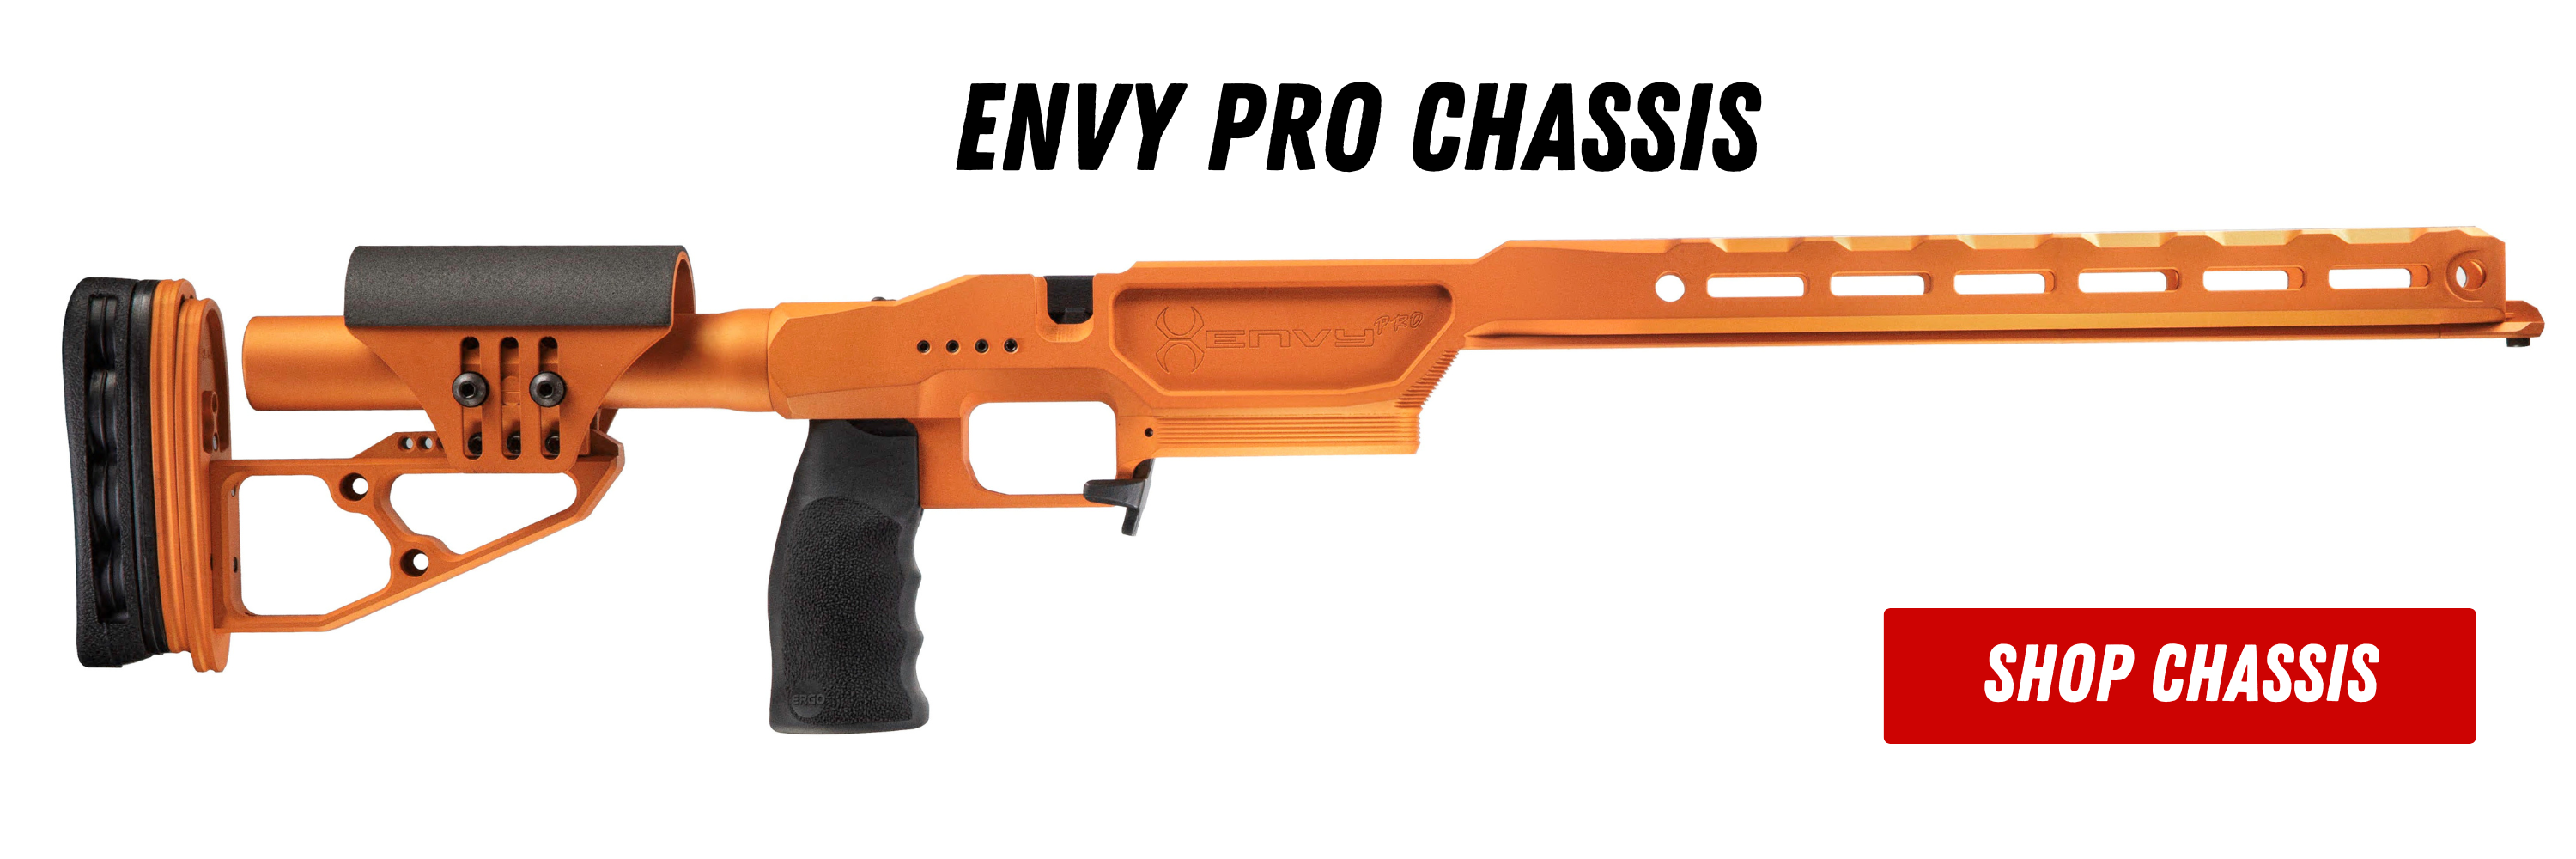 XLR ENVY Pro Chassis Packages